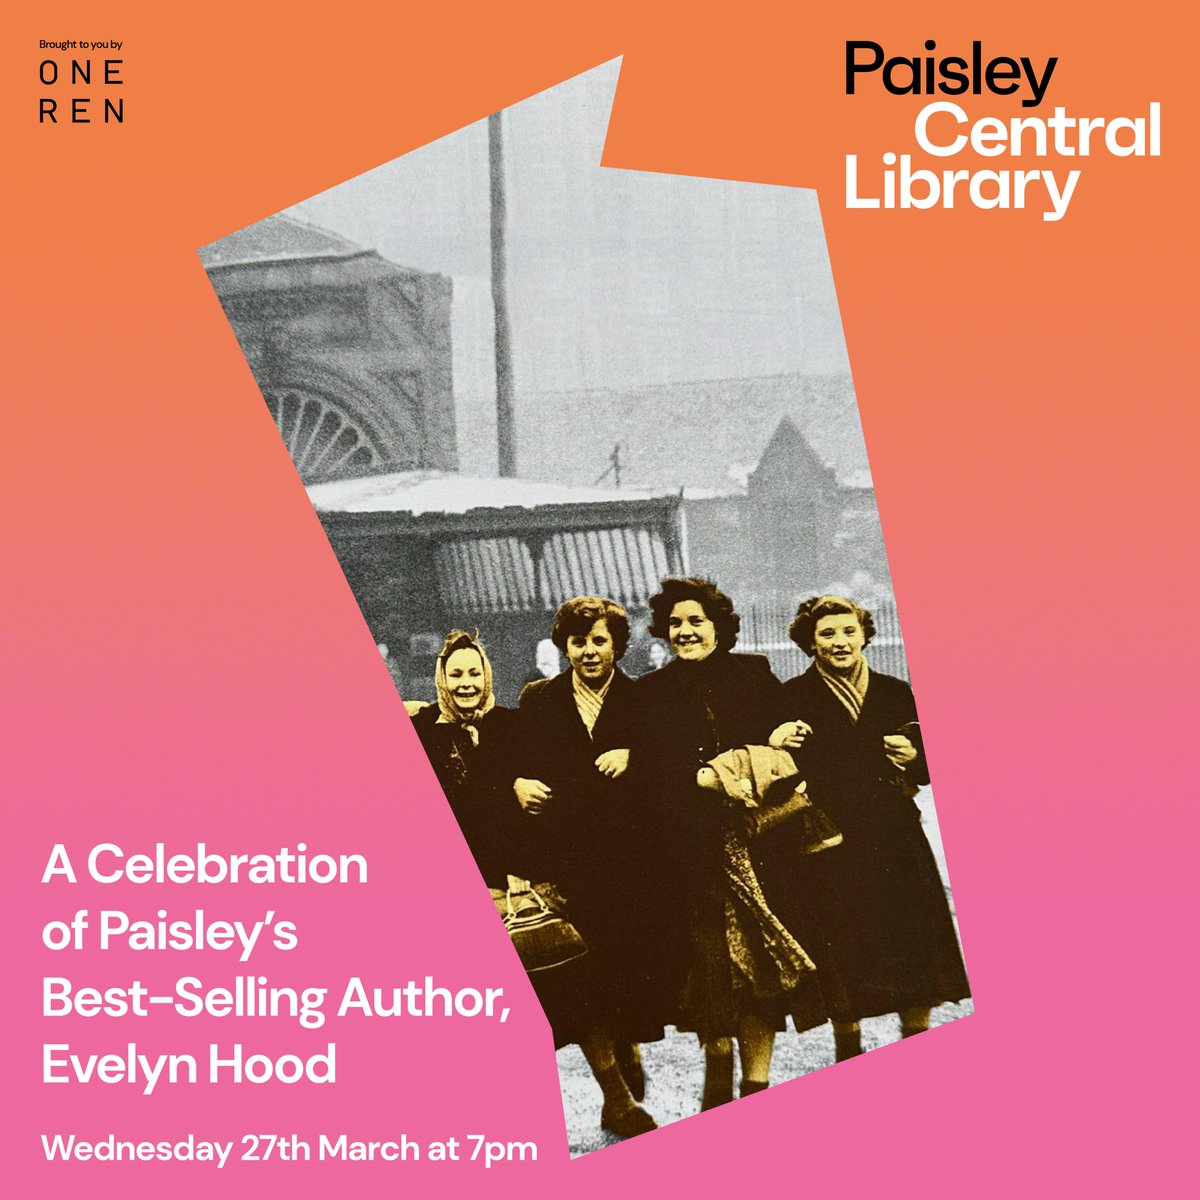 Last call for tickets to tomorrow's celebration of Evelyn Hood in Paisley Central Library! Don't miss out on an evening with Evelyn's son Simon, as we delve into her timeless works, including 'Mill Memories'. Wed 27 Feb at 7pm Book your FREE ticket👉 bit.ly/3vinWY8